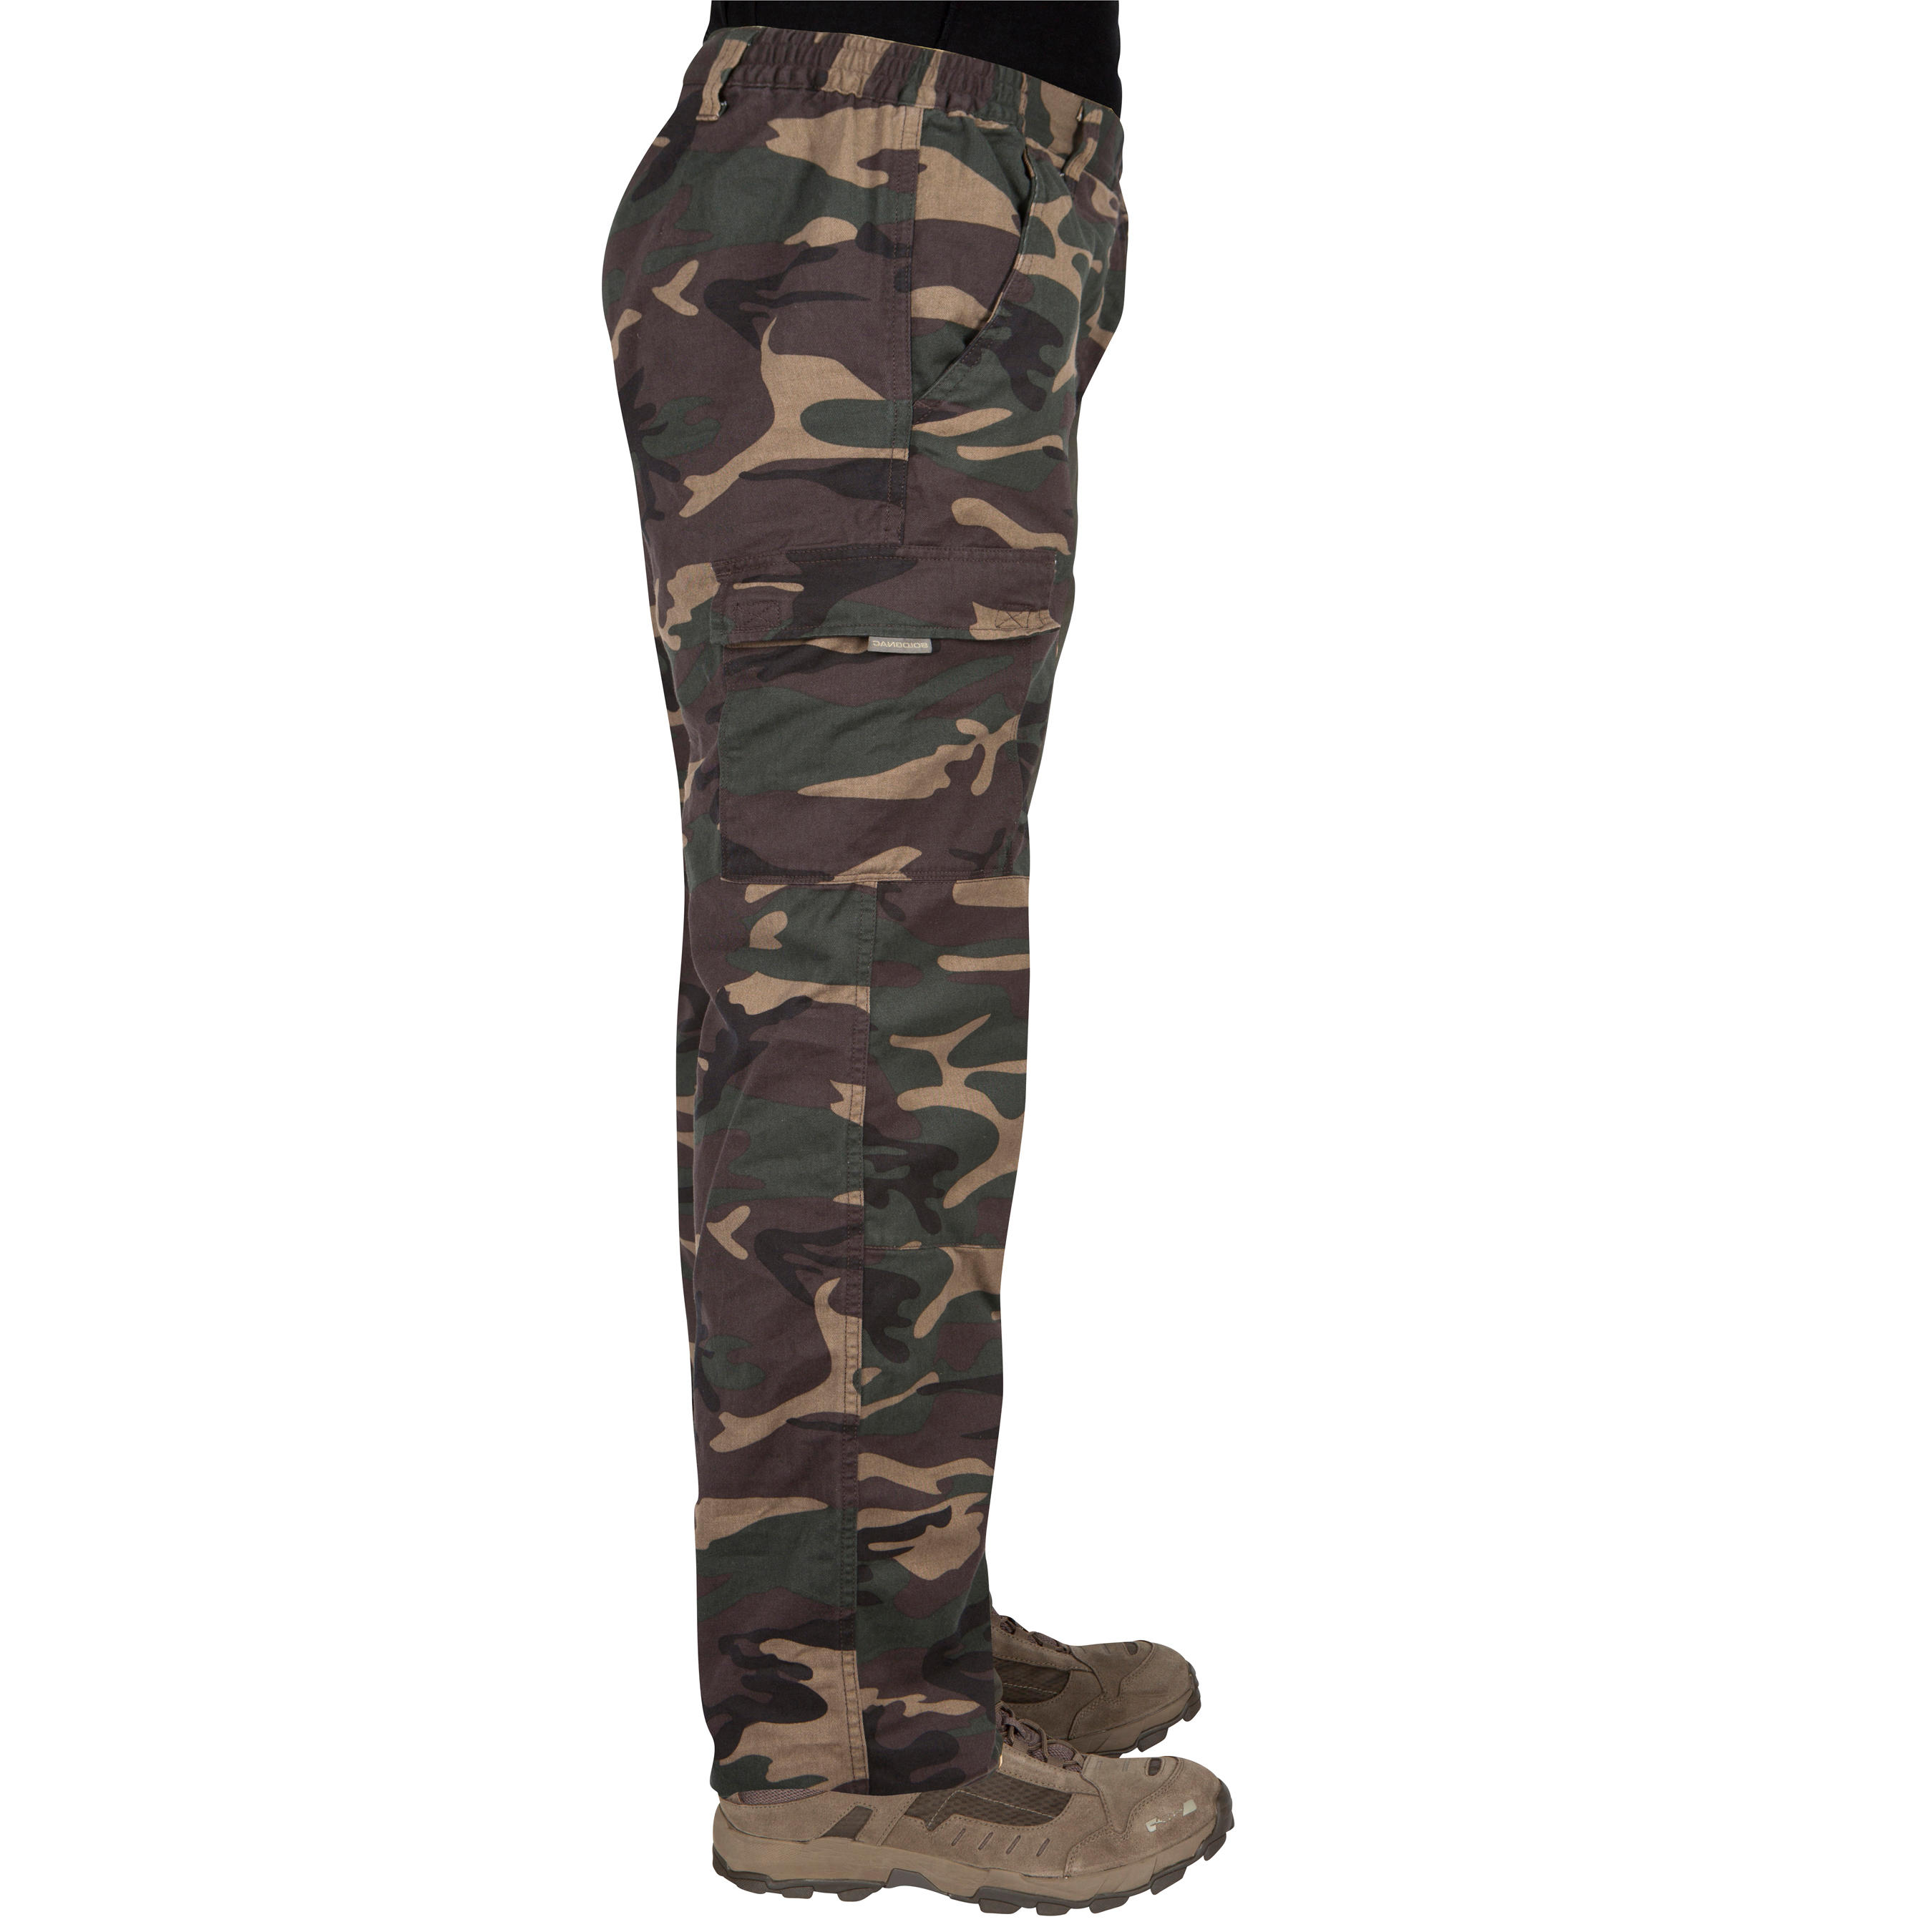 GENUINE US ARMY WOODLAND CAMO FIELD PANTS  Apparel  Pants  Field Pants  militarysurpluseu  Army Navy Surplus  Tactical  Big variety  Cheap  prices  Military Surplus Clothing Law Enforcement Boots Outdoor   Tactical Gear